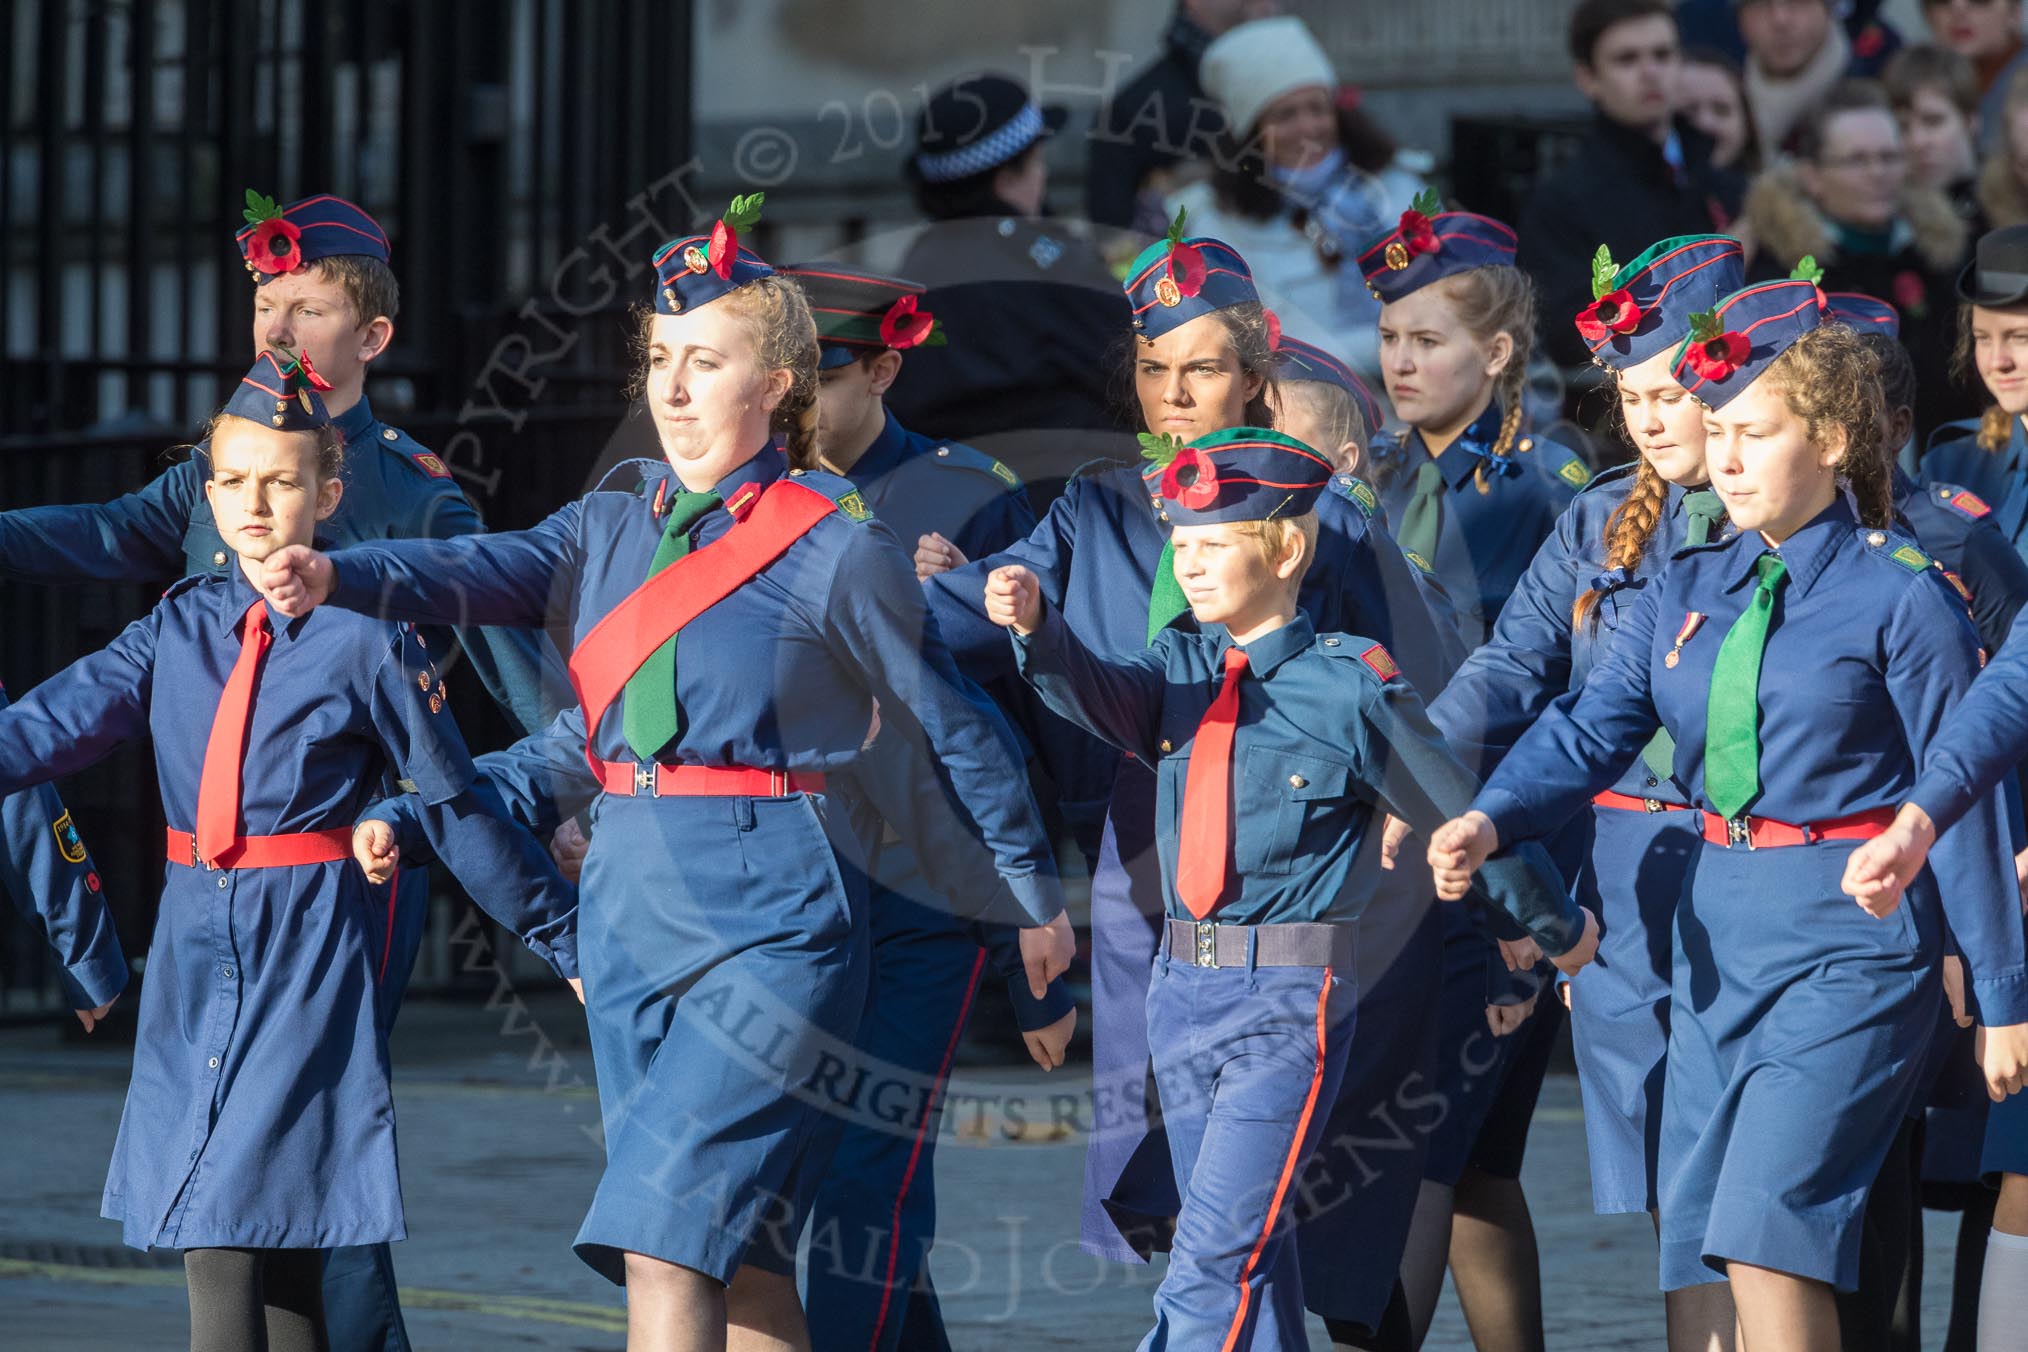 March Past, Remembrance Sunday at the Cenotaph 2016: M36 Church Lads & Church Girls Brigade.
Cenotaph, Whitehall, London SW1,
London,
Greater London,
United Kingdom,
on 13 November 2016 at 13:18, image #2881